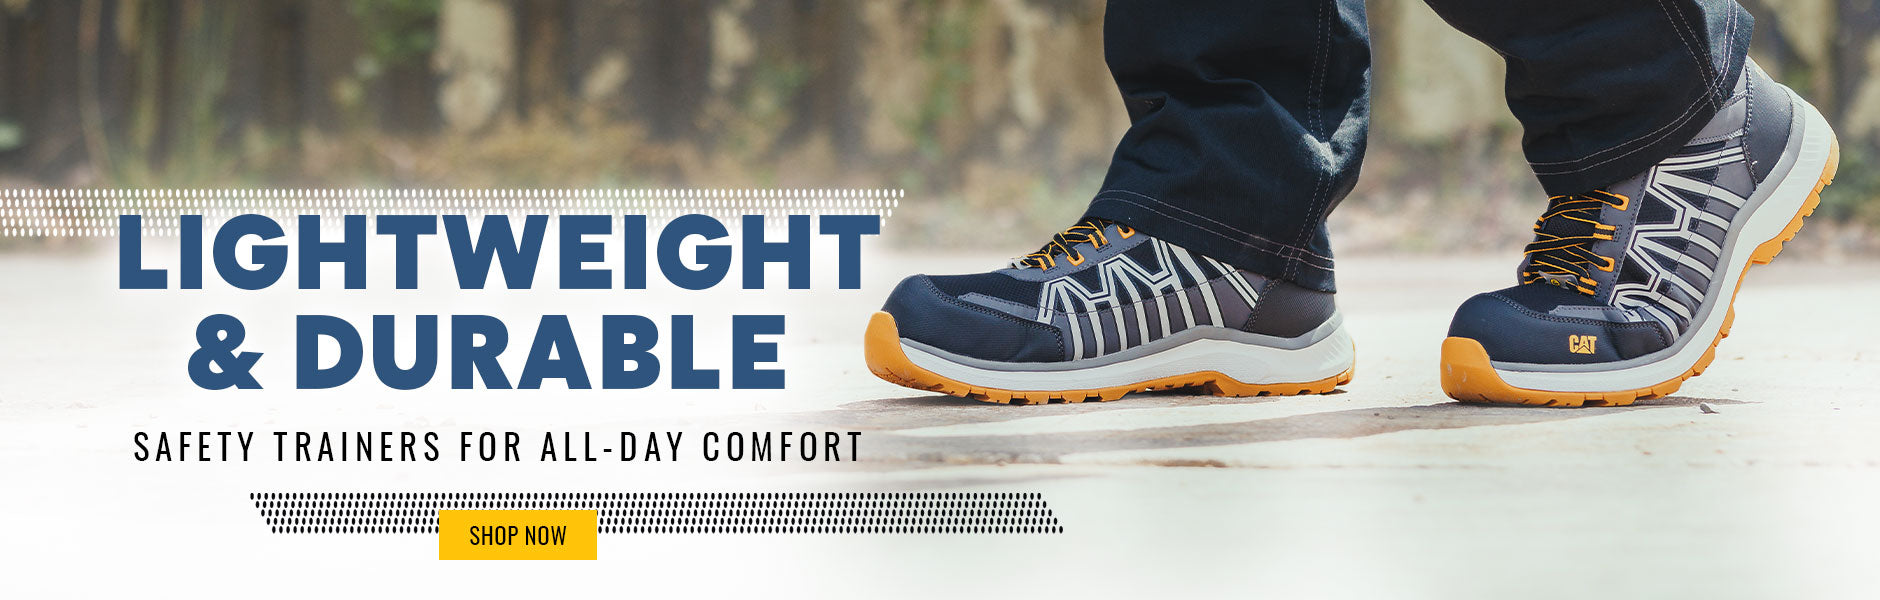 LIGHTWEIGHT & DURABLE. SAFETY TRAINERS FOR ALL DAY COMFORT. SHOP NOW. Image of a person wearing a pair of orange/black Caterpillar Charge Trainers 